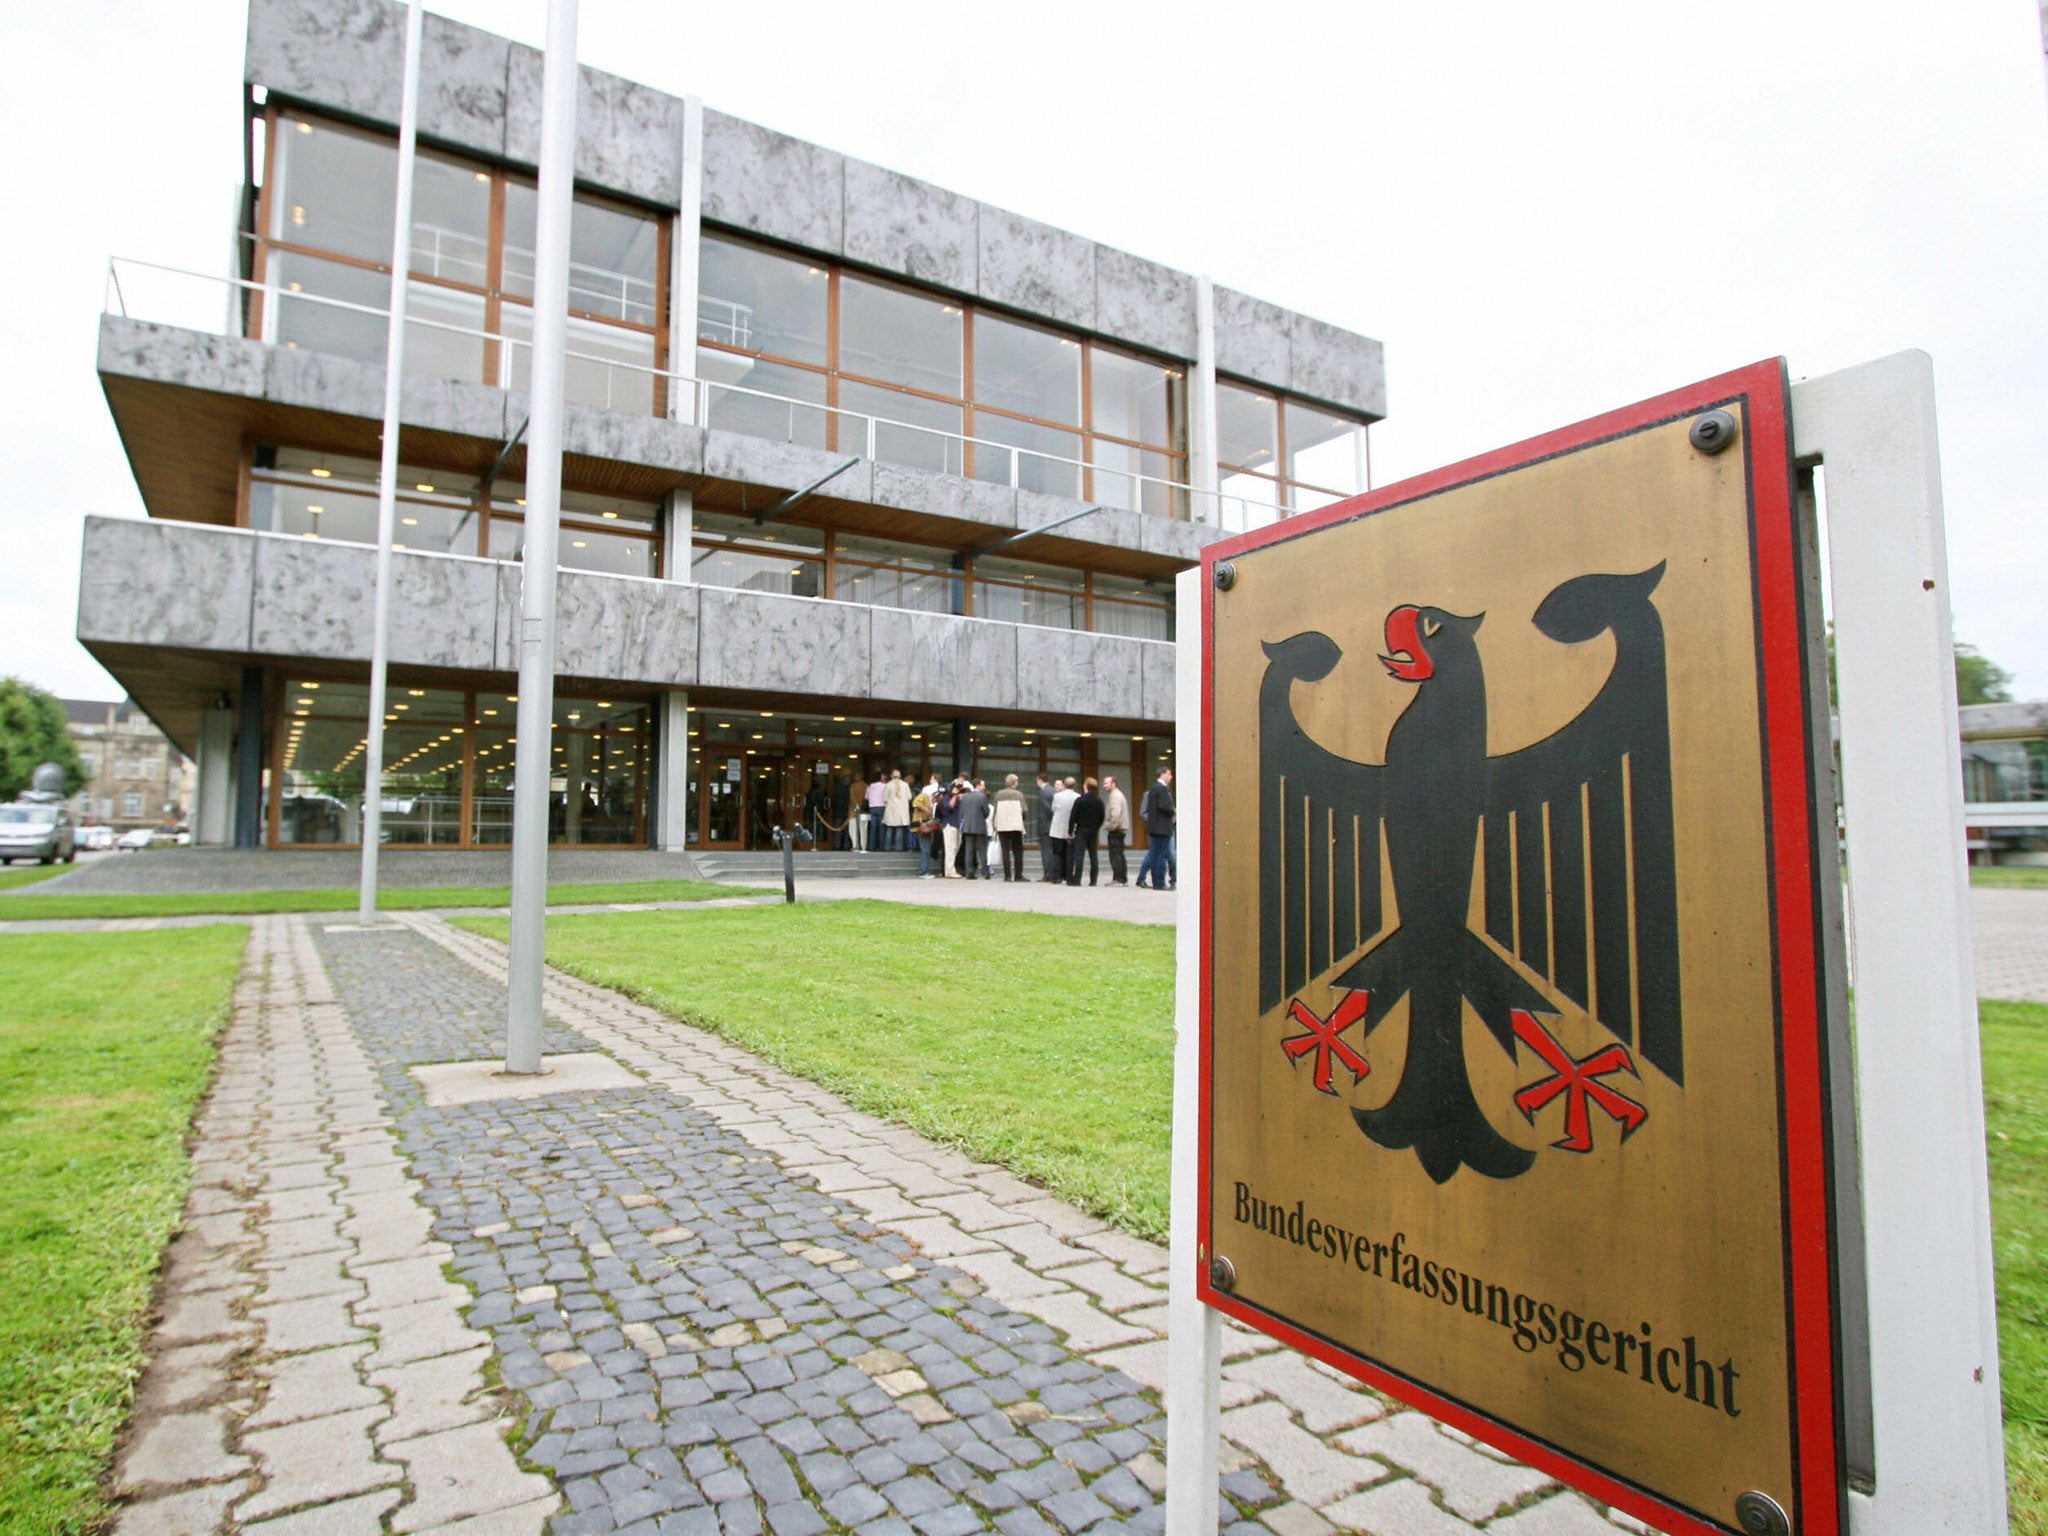 The Federal Constitutional Court in Germany upheld the ban